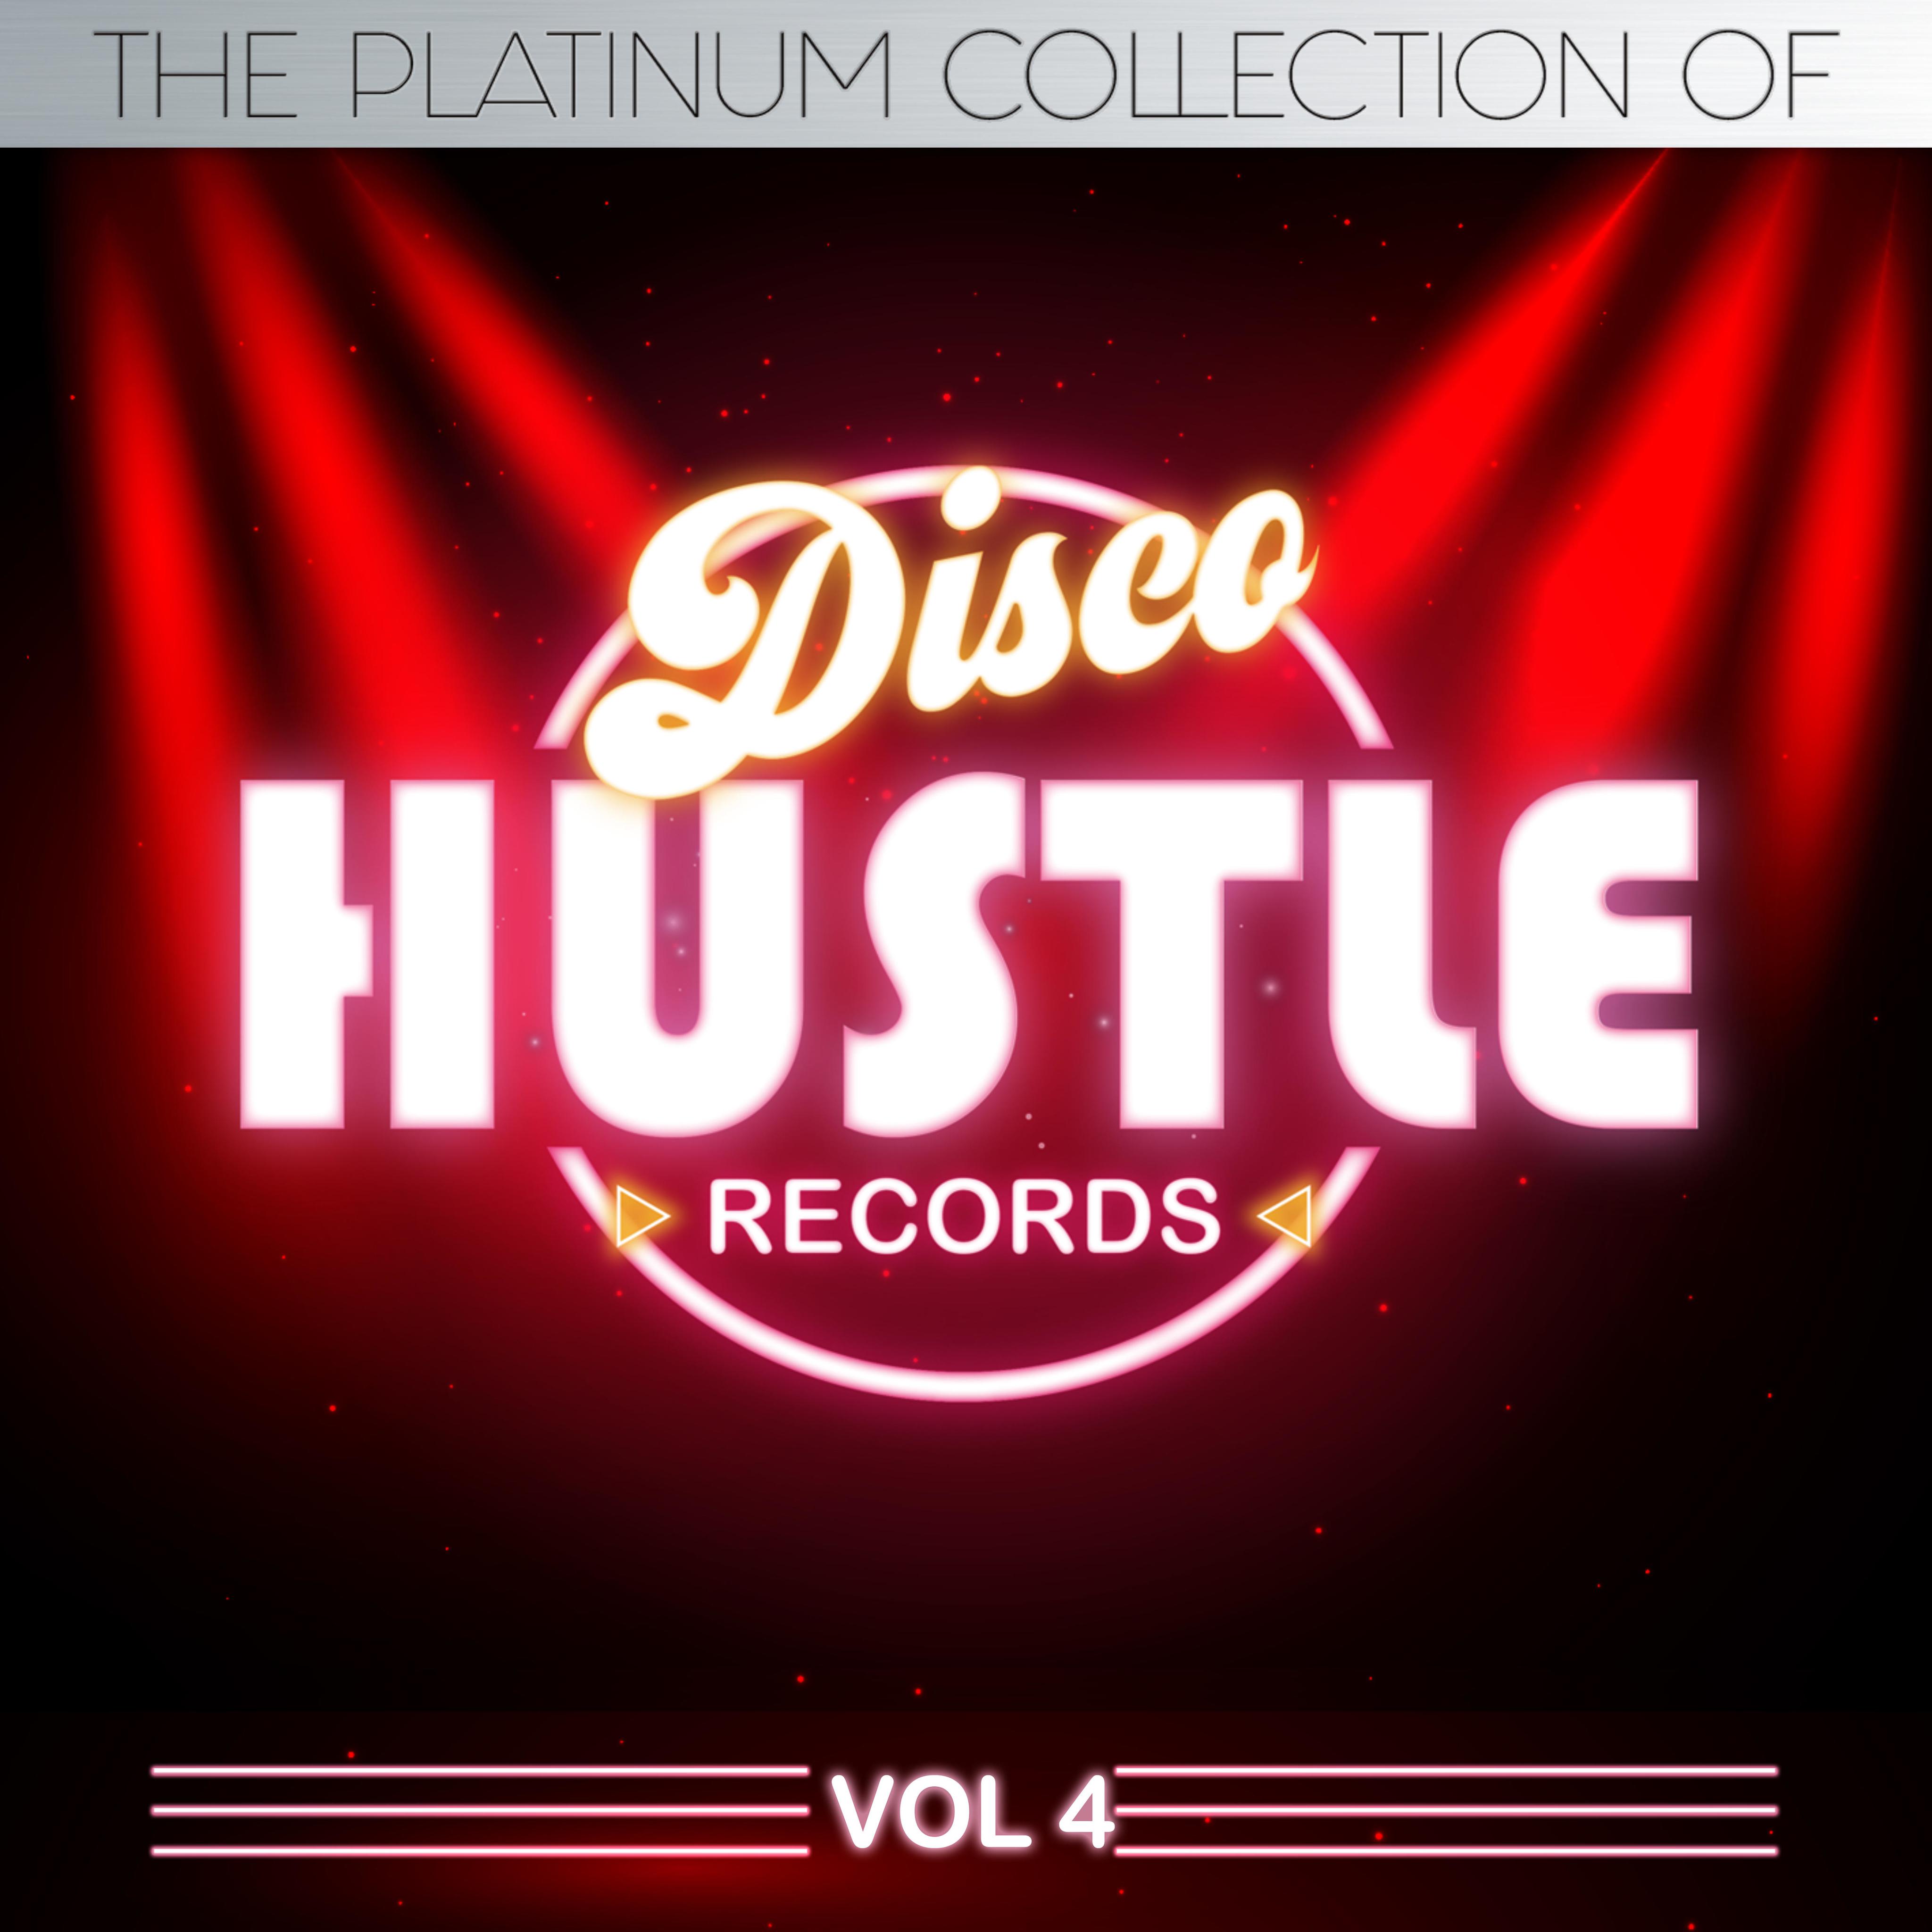 The Platinum Collection of Disco Hustle, Vol.4